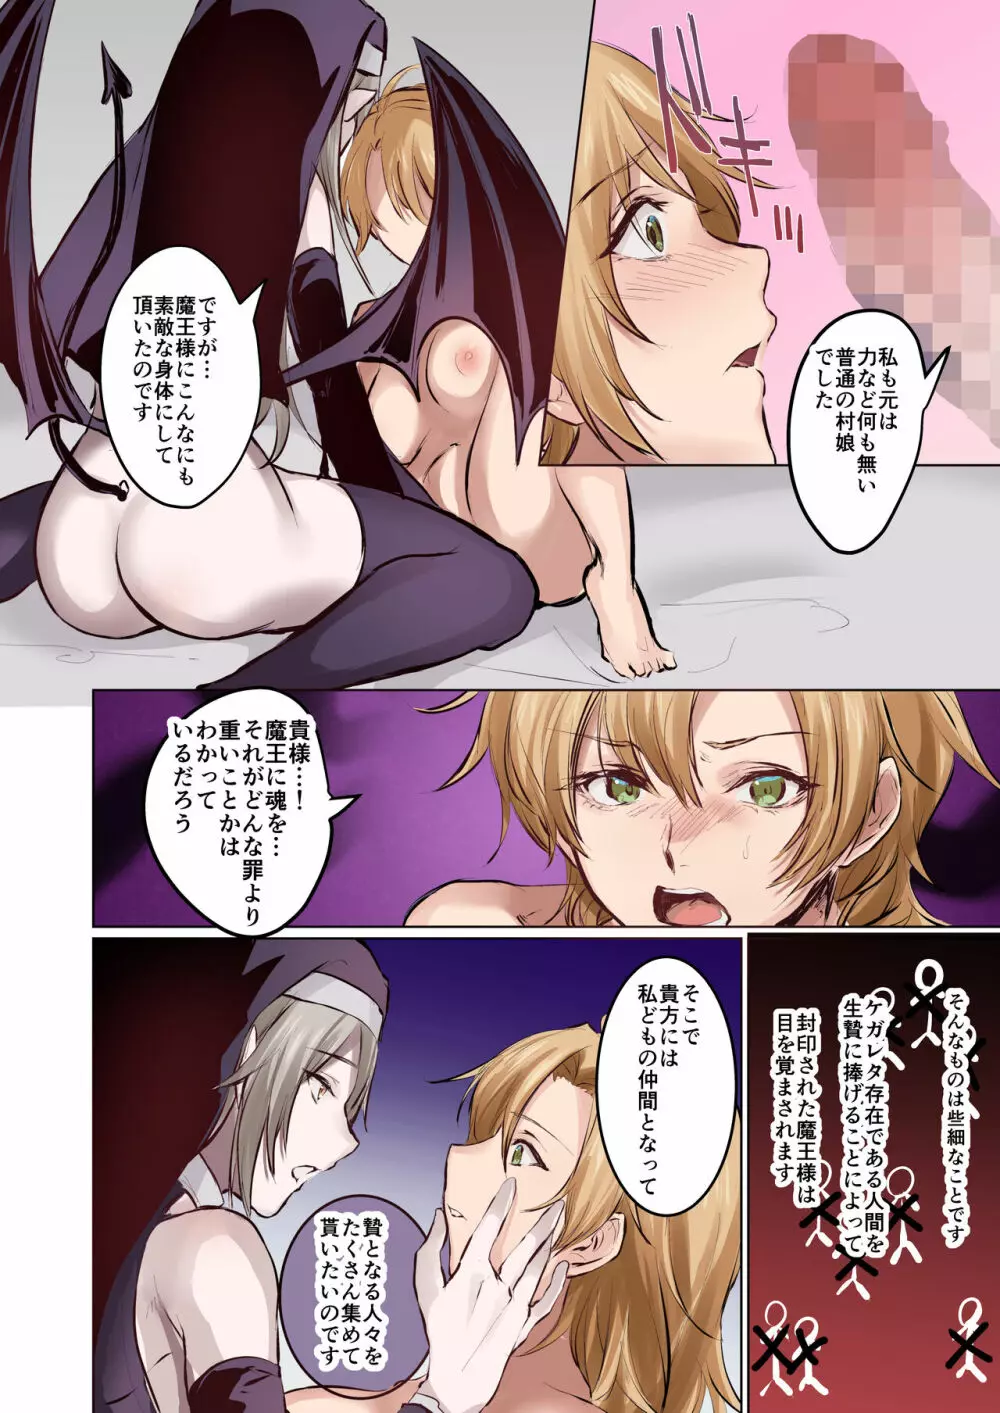 From Virtue to Vice ～淫魔♀に堕ちる聖騎士♂～ - page19